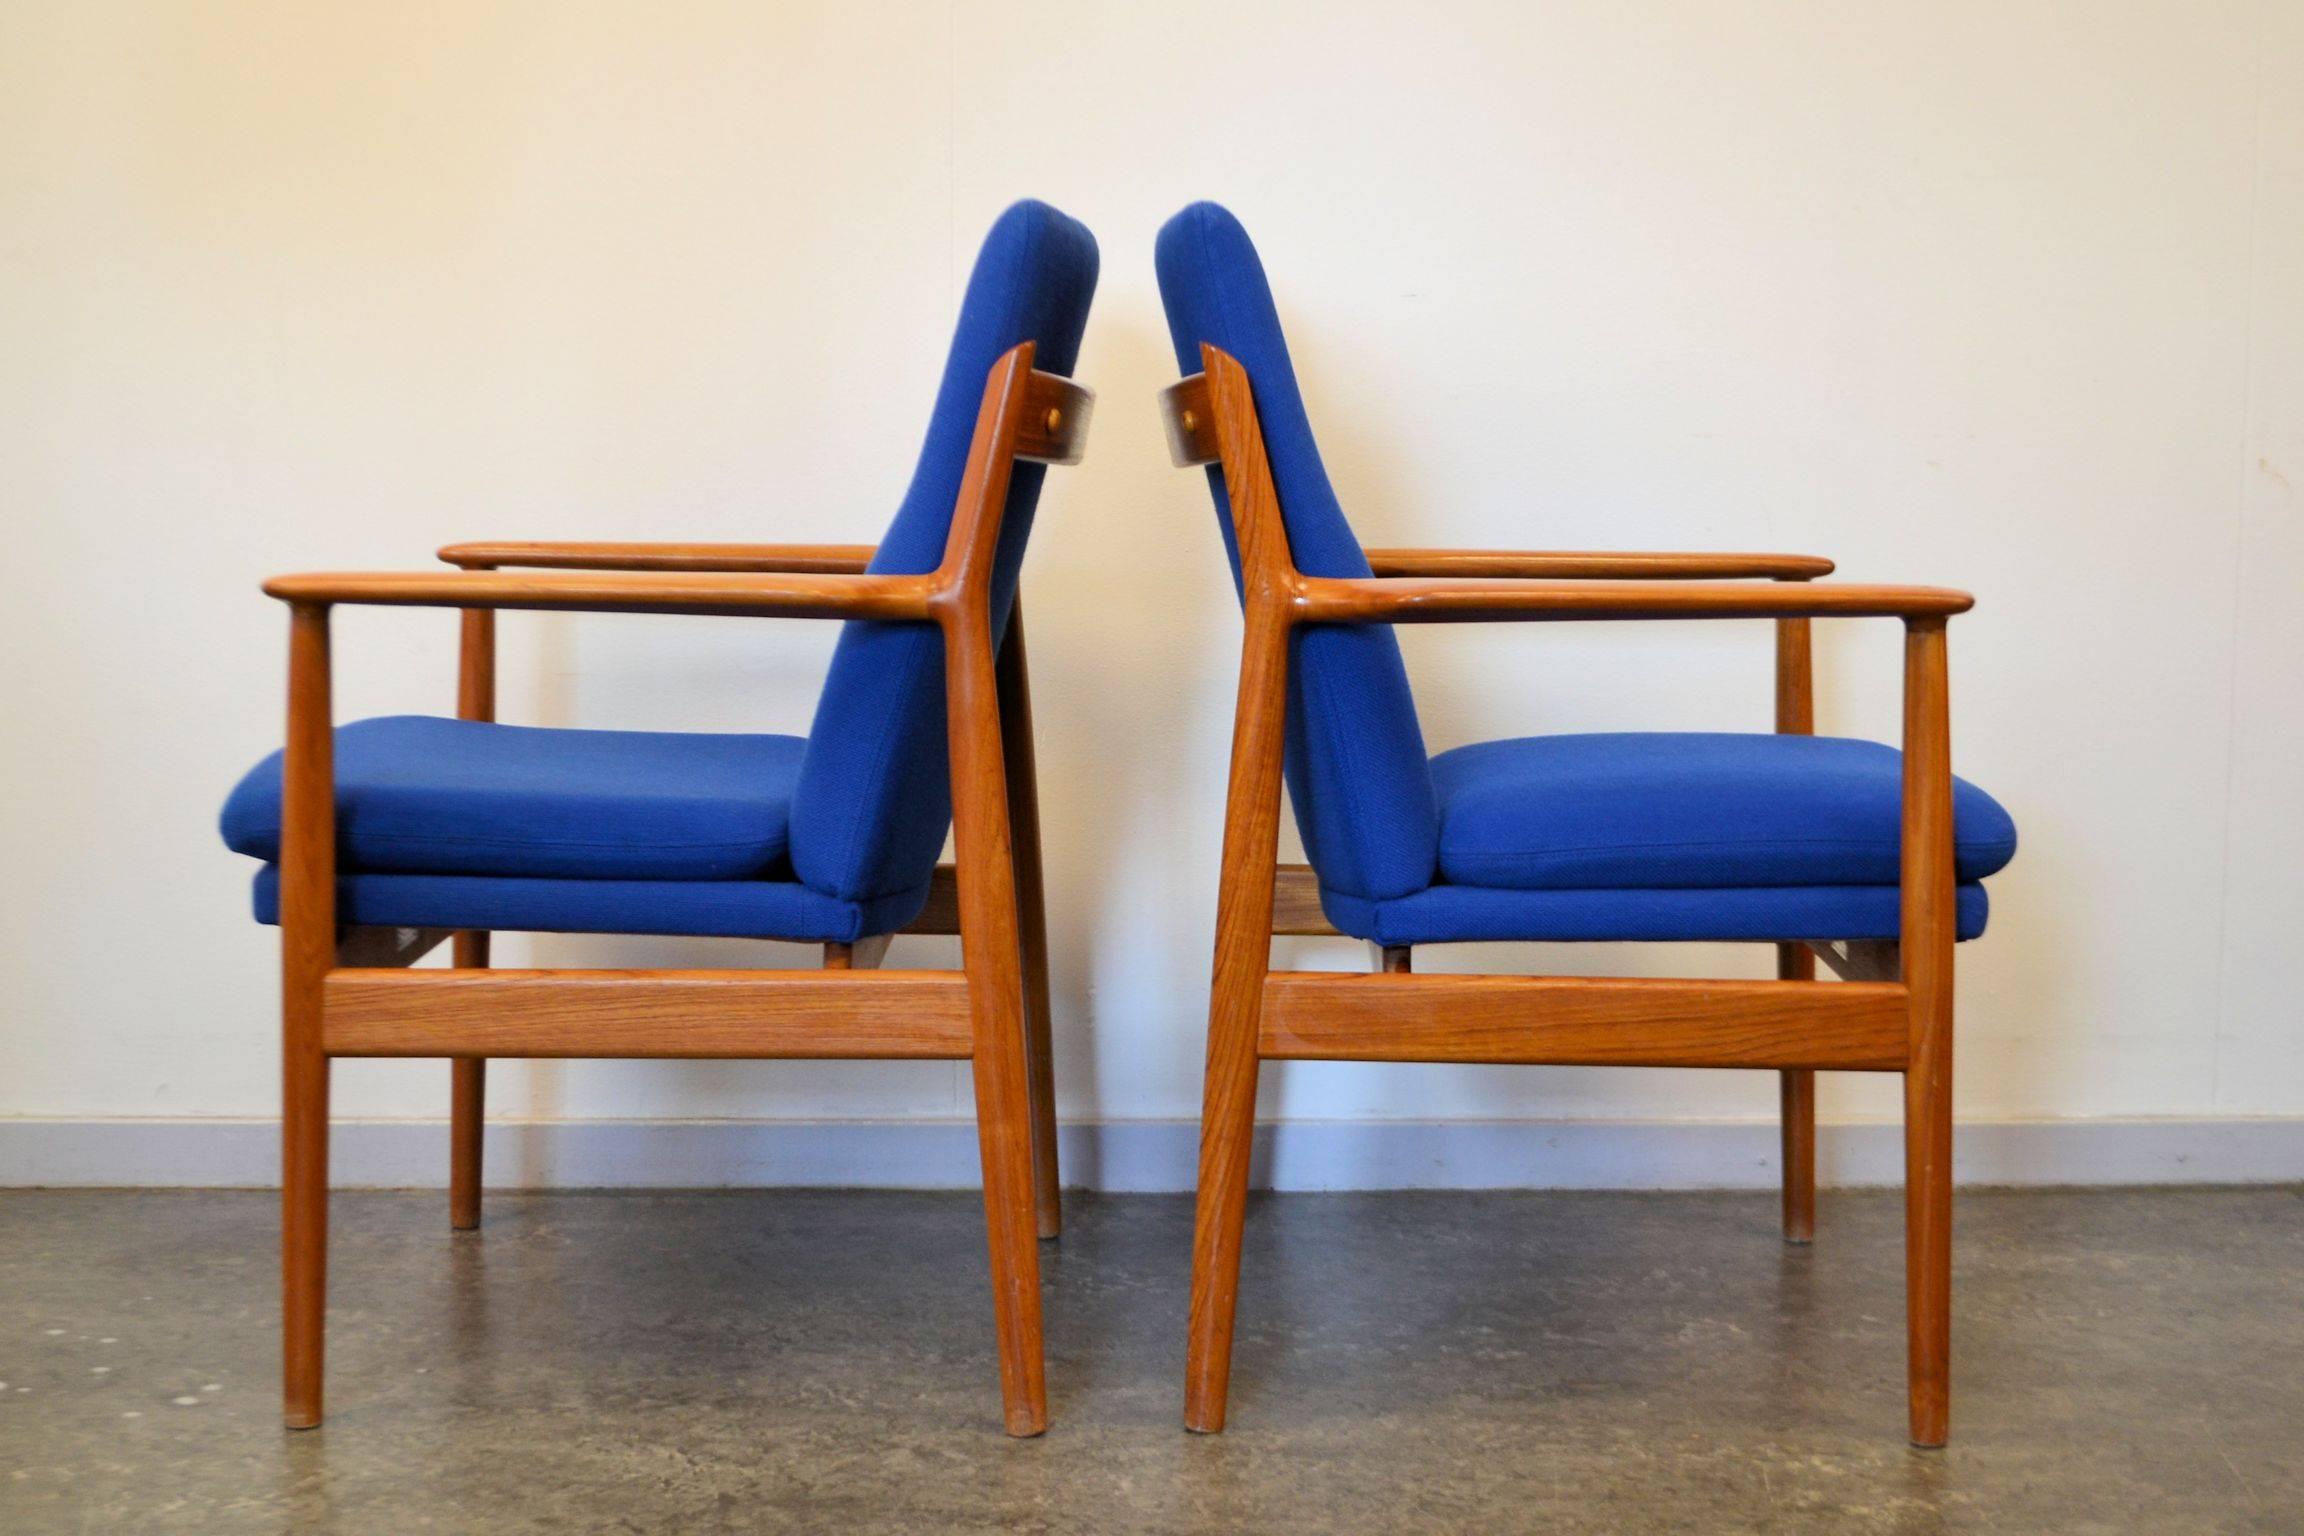 Set of two Danish modern easy chairs designed by Arne Vodder for Danish manufacturer Sibast Møbler. These comfortable, solid teak chairs feature a typical organic Arne Vodder design and cobalt blue upholstery. Sit back, relax and enjoy these